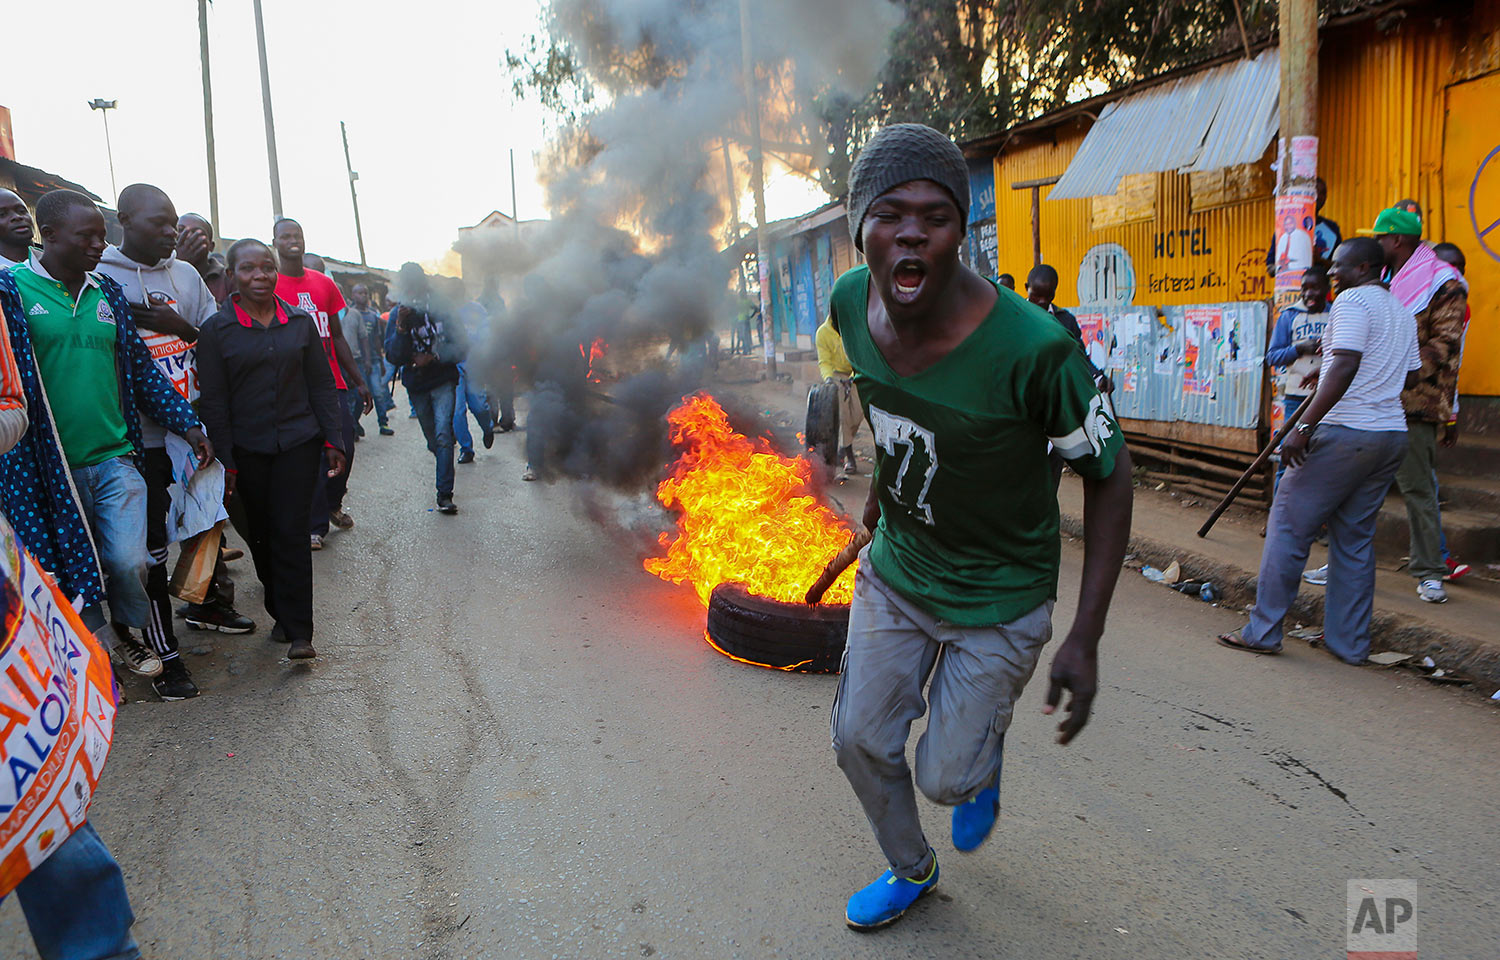  A man pulls a burning tire in Kibera, Nairobi, Kenya, as others block roads with stones to protest in support of Kenyan opposition leader and presidential candidate Raila Odinga, Wednesday, Aug. 9, 2017. Kenya's election took an ominous turn on Wednesday as violent protests erupted in the capital and elsewhere after opposition leader Raila Odinga alleged fraud, saying hackers used the identity of a murdered official to infiltrate the database of the country's election commission and manipulate results. (AP Photo/Brian Inganga) 